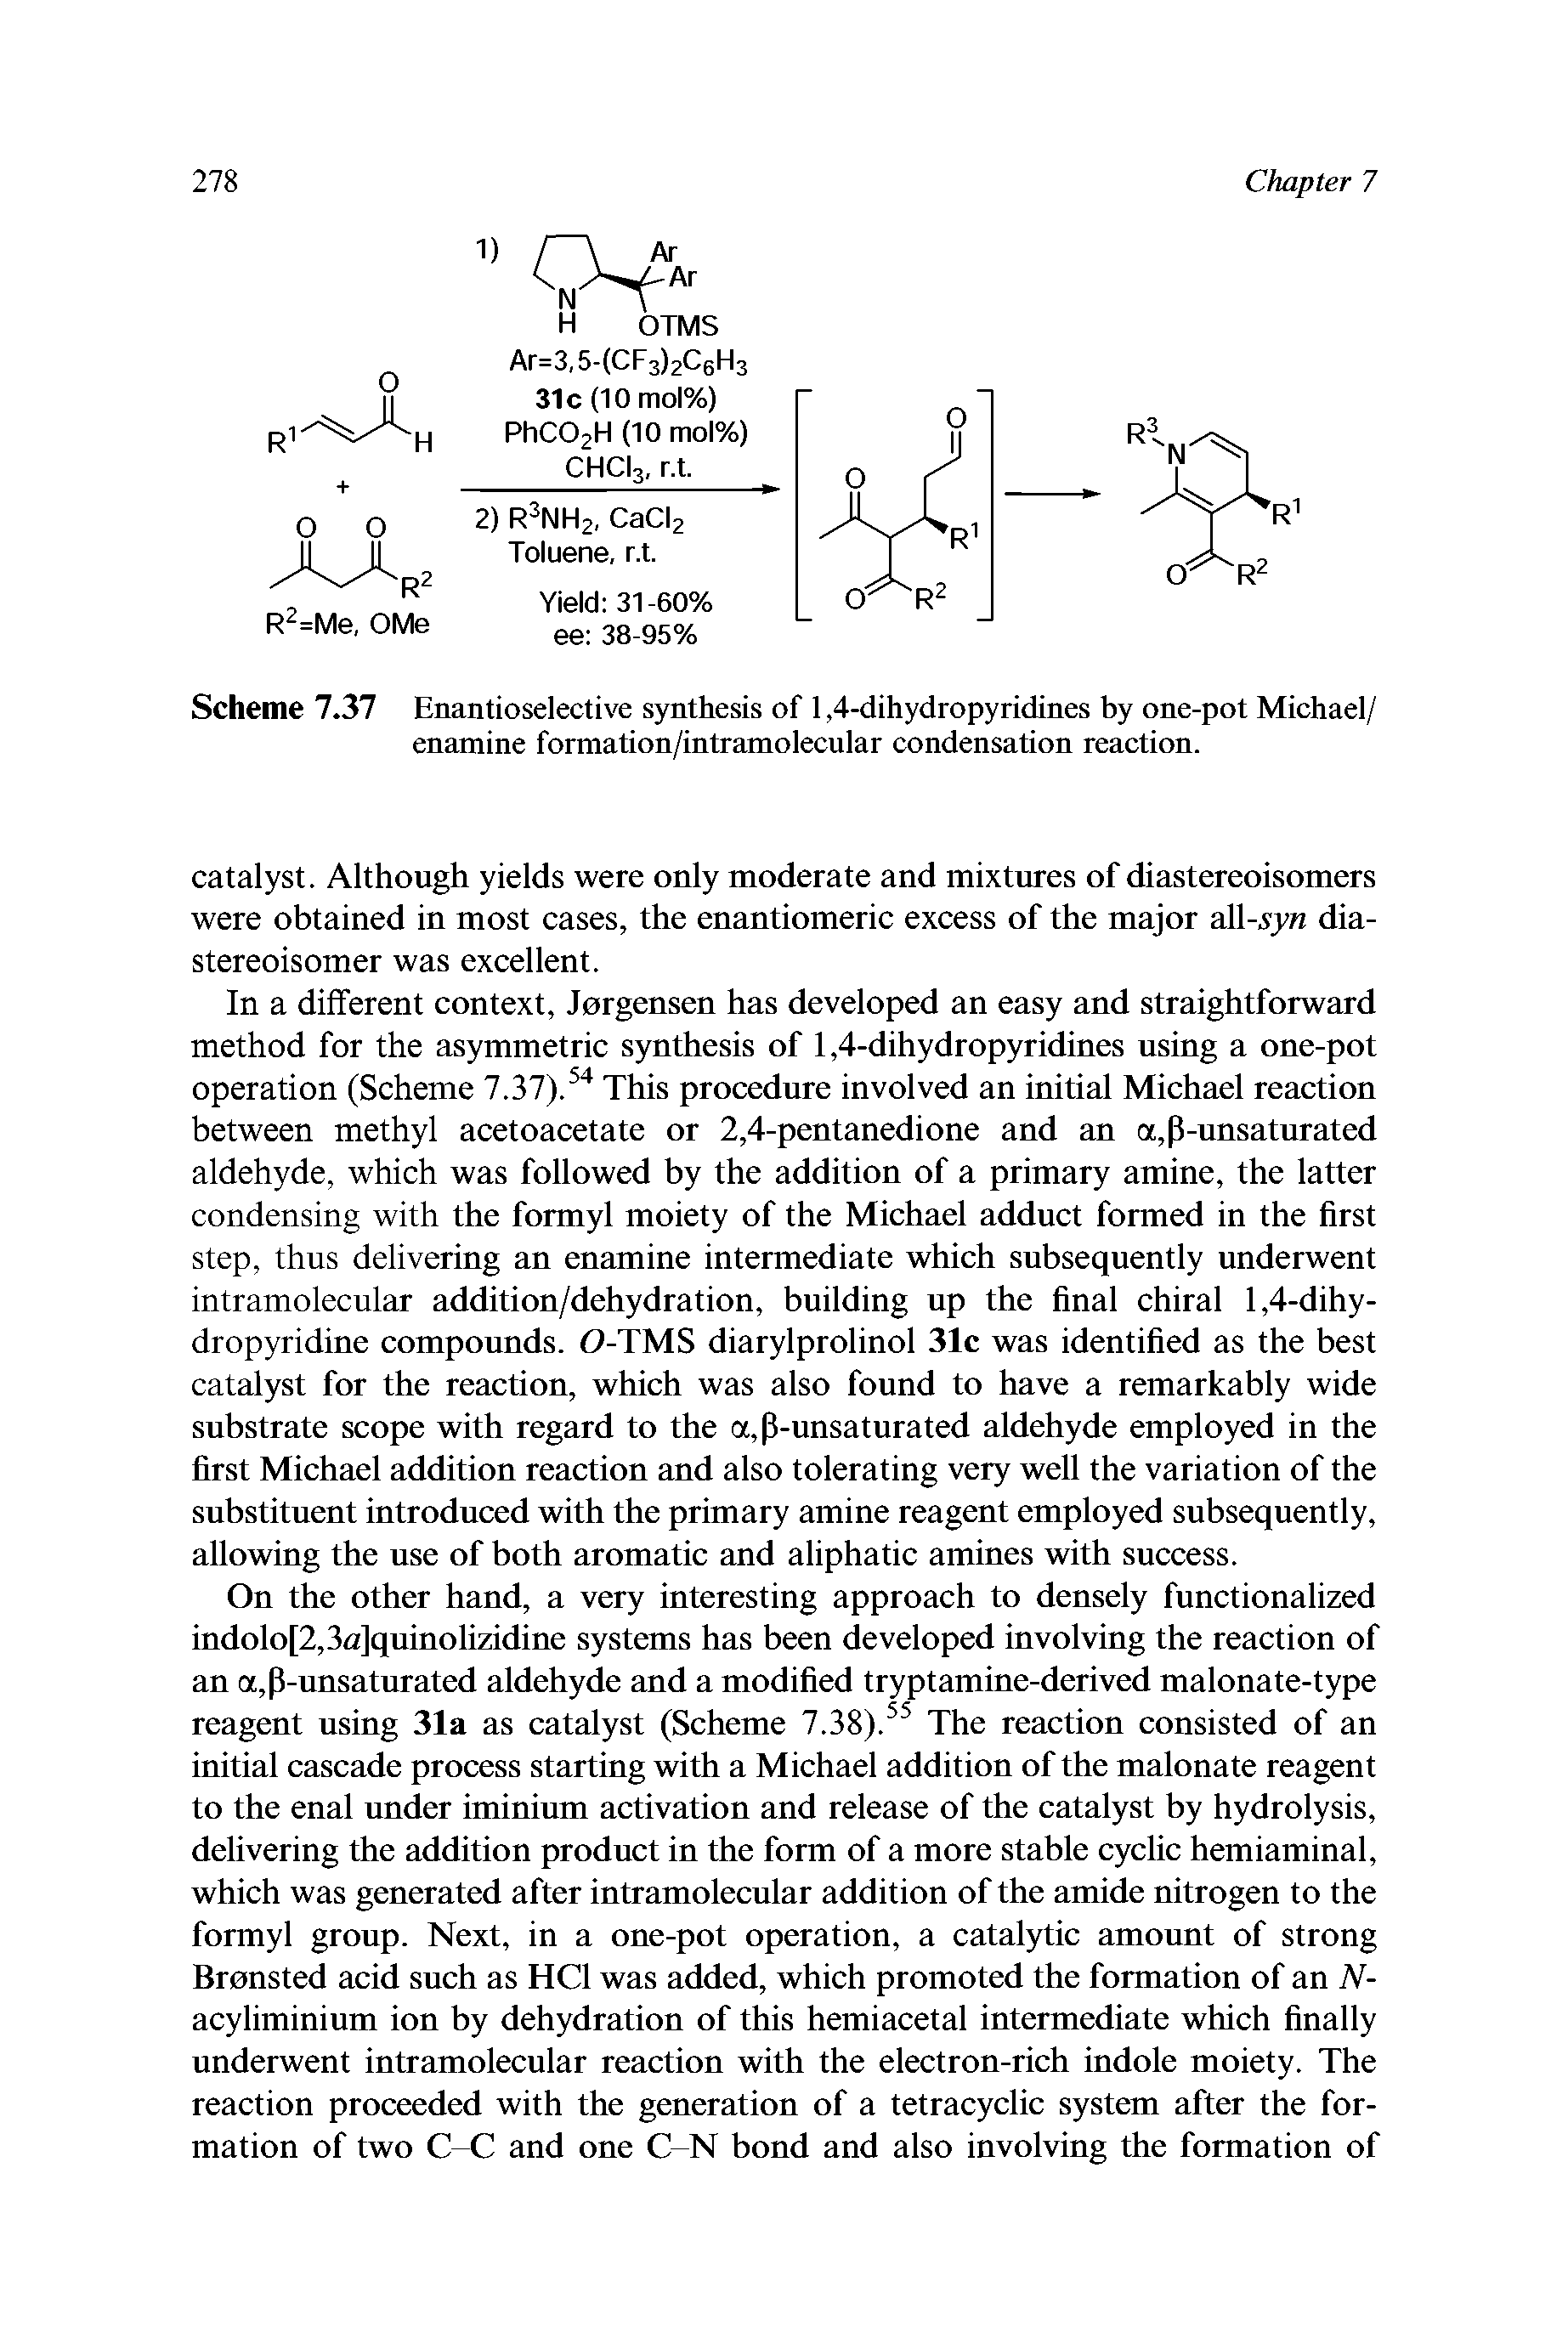 Scheme 7.37 Enantioselective synthesis of 1,4-dihydropyridines by one-pot Michael/ enamine formation/intramolecular condensation reaction.